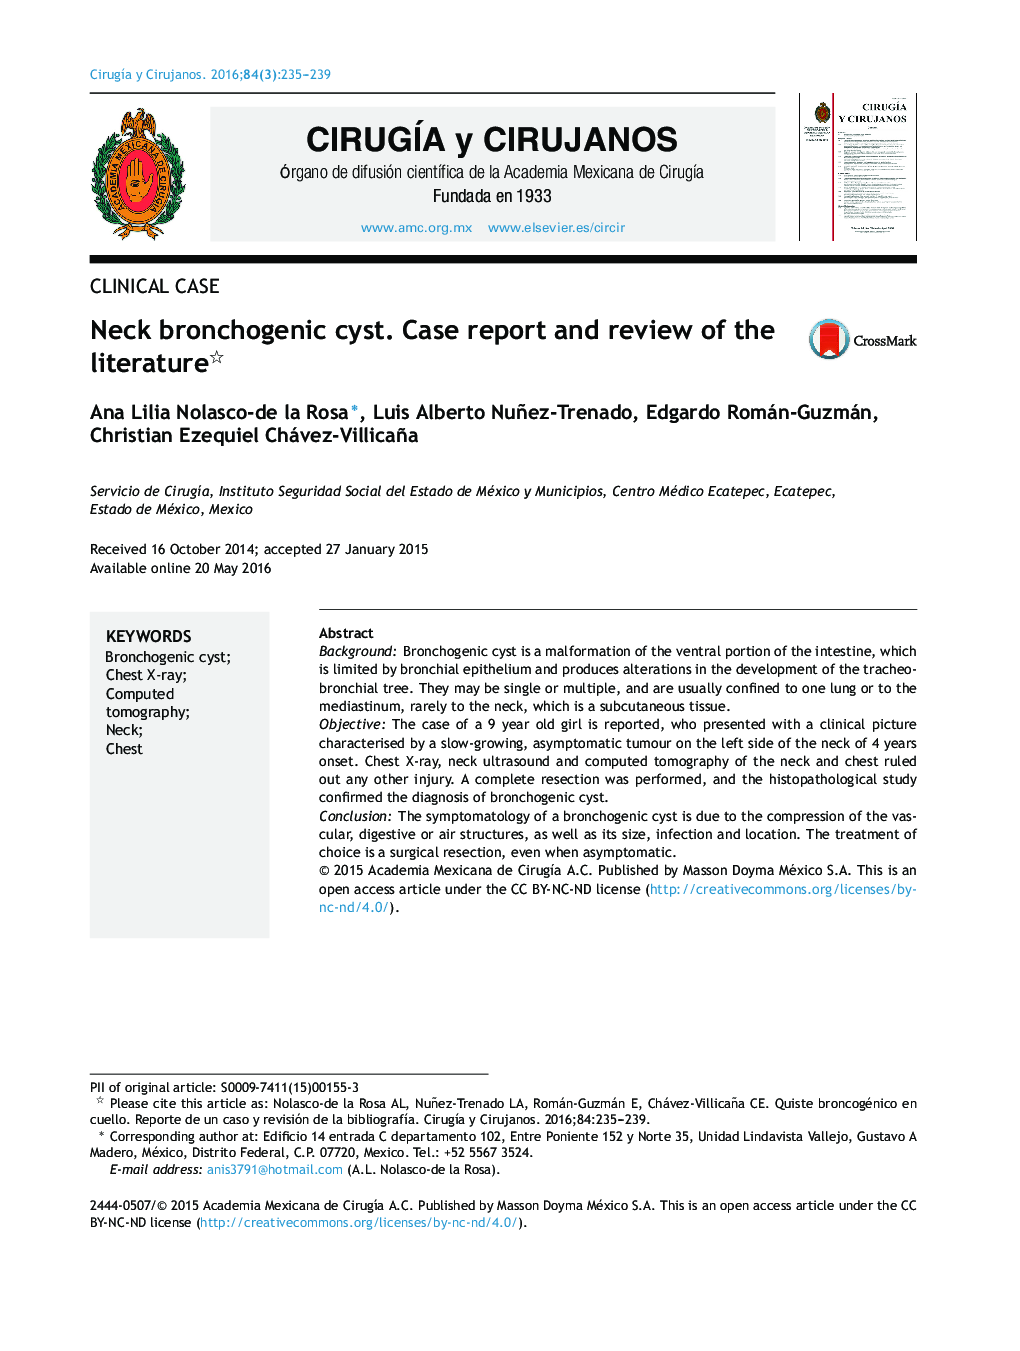 Neck bronchogenic cyst. Case report and review of the literature